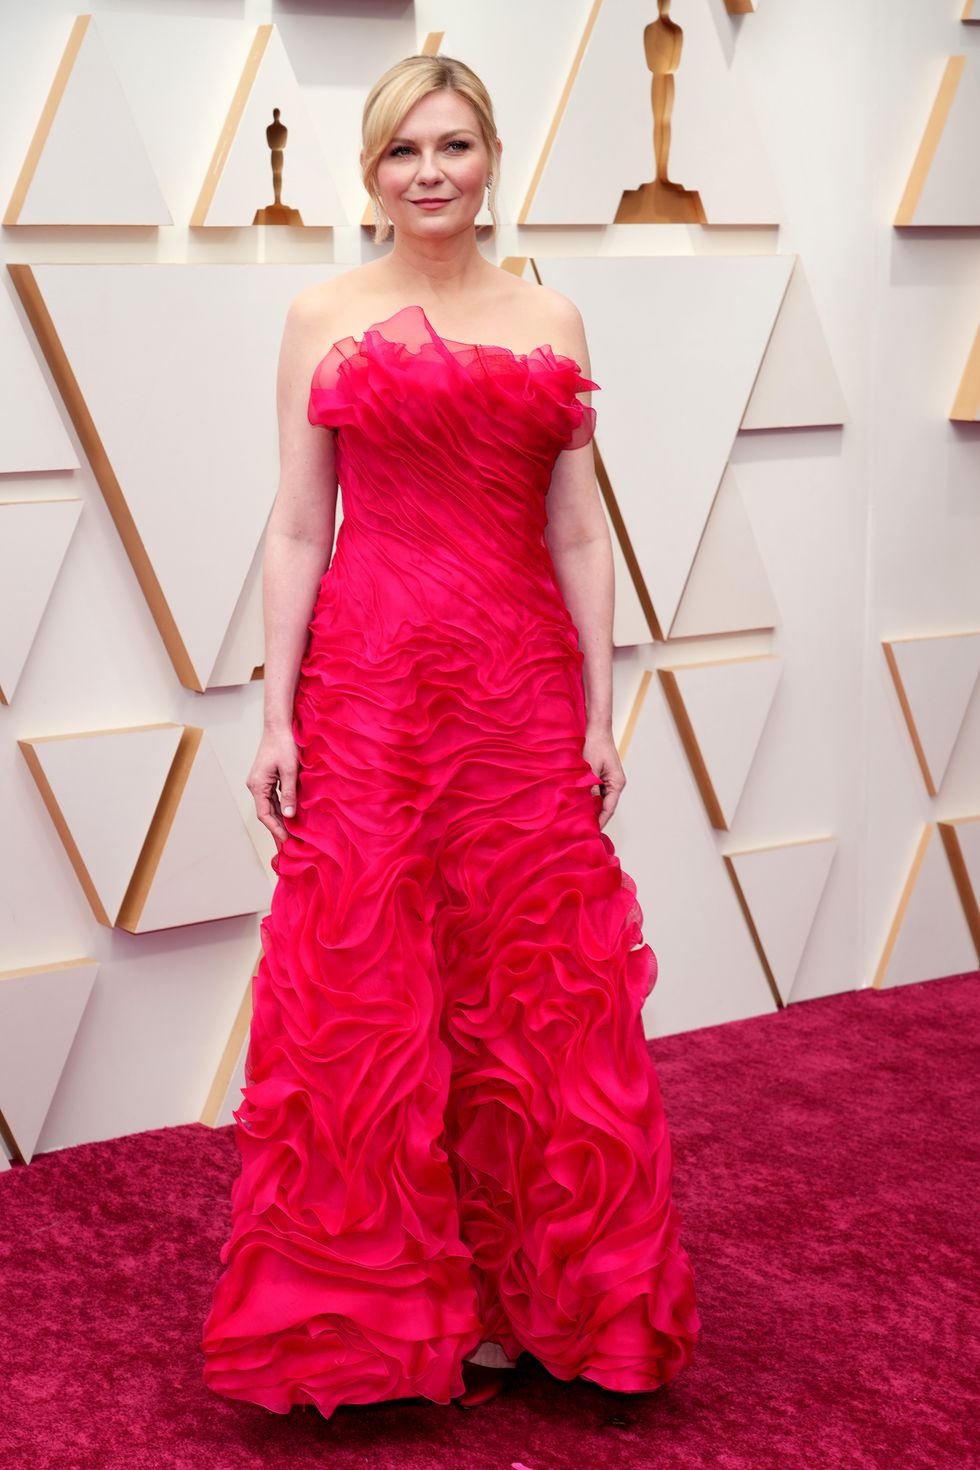 Kirsten Dunst 2022 oscar awards KEVIN MAZURGETTY IMAGES Wearing Lacroix and Fred Leighton jewels.